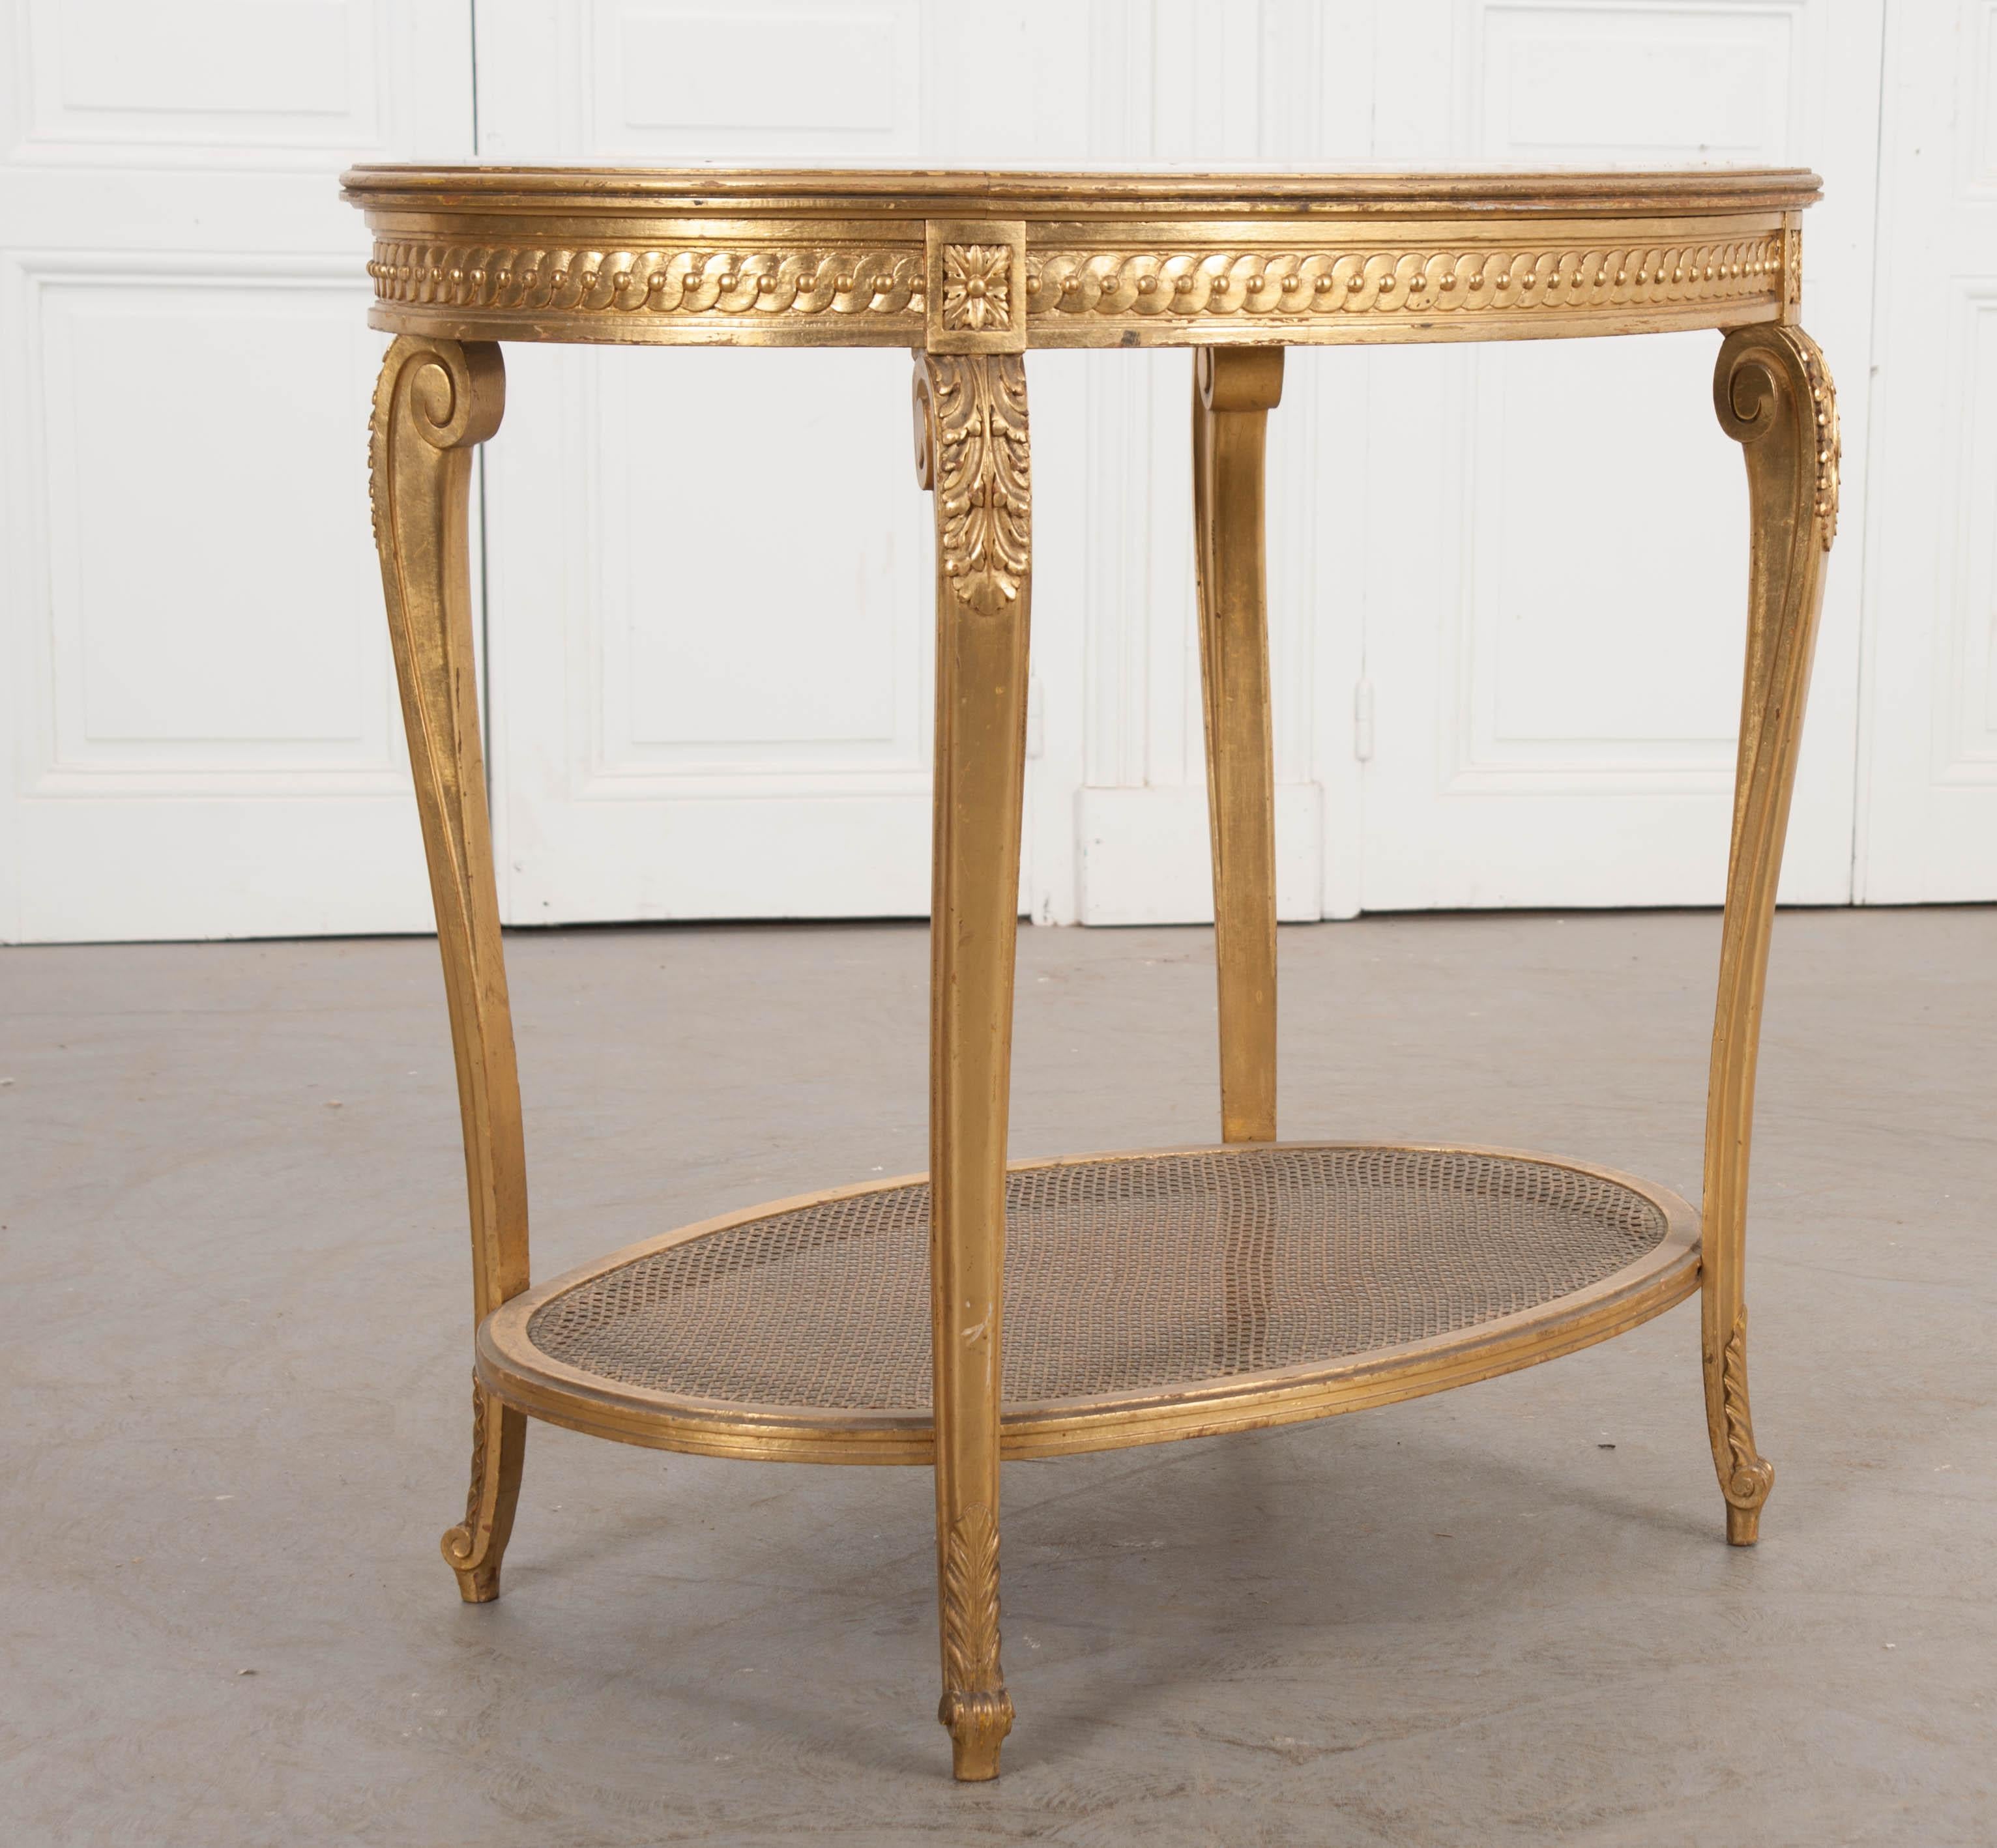 This graceful oval giltwood occasional table, circa 1880, is from France and features a white marble top with delicate grey veining, over an intricately carved apron with four gentle cabriole splayed legs and feet supported by a caned lower